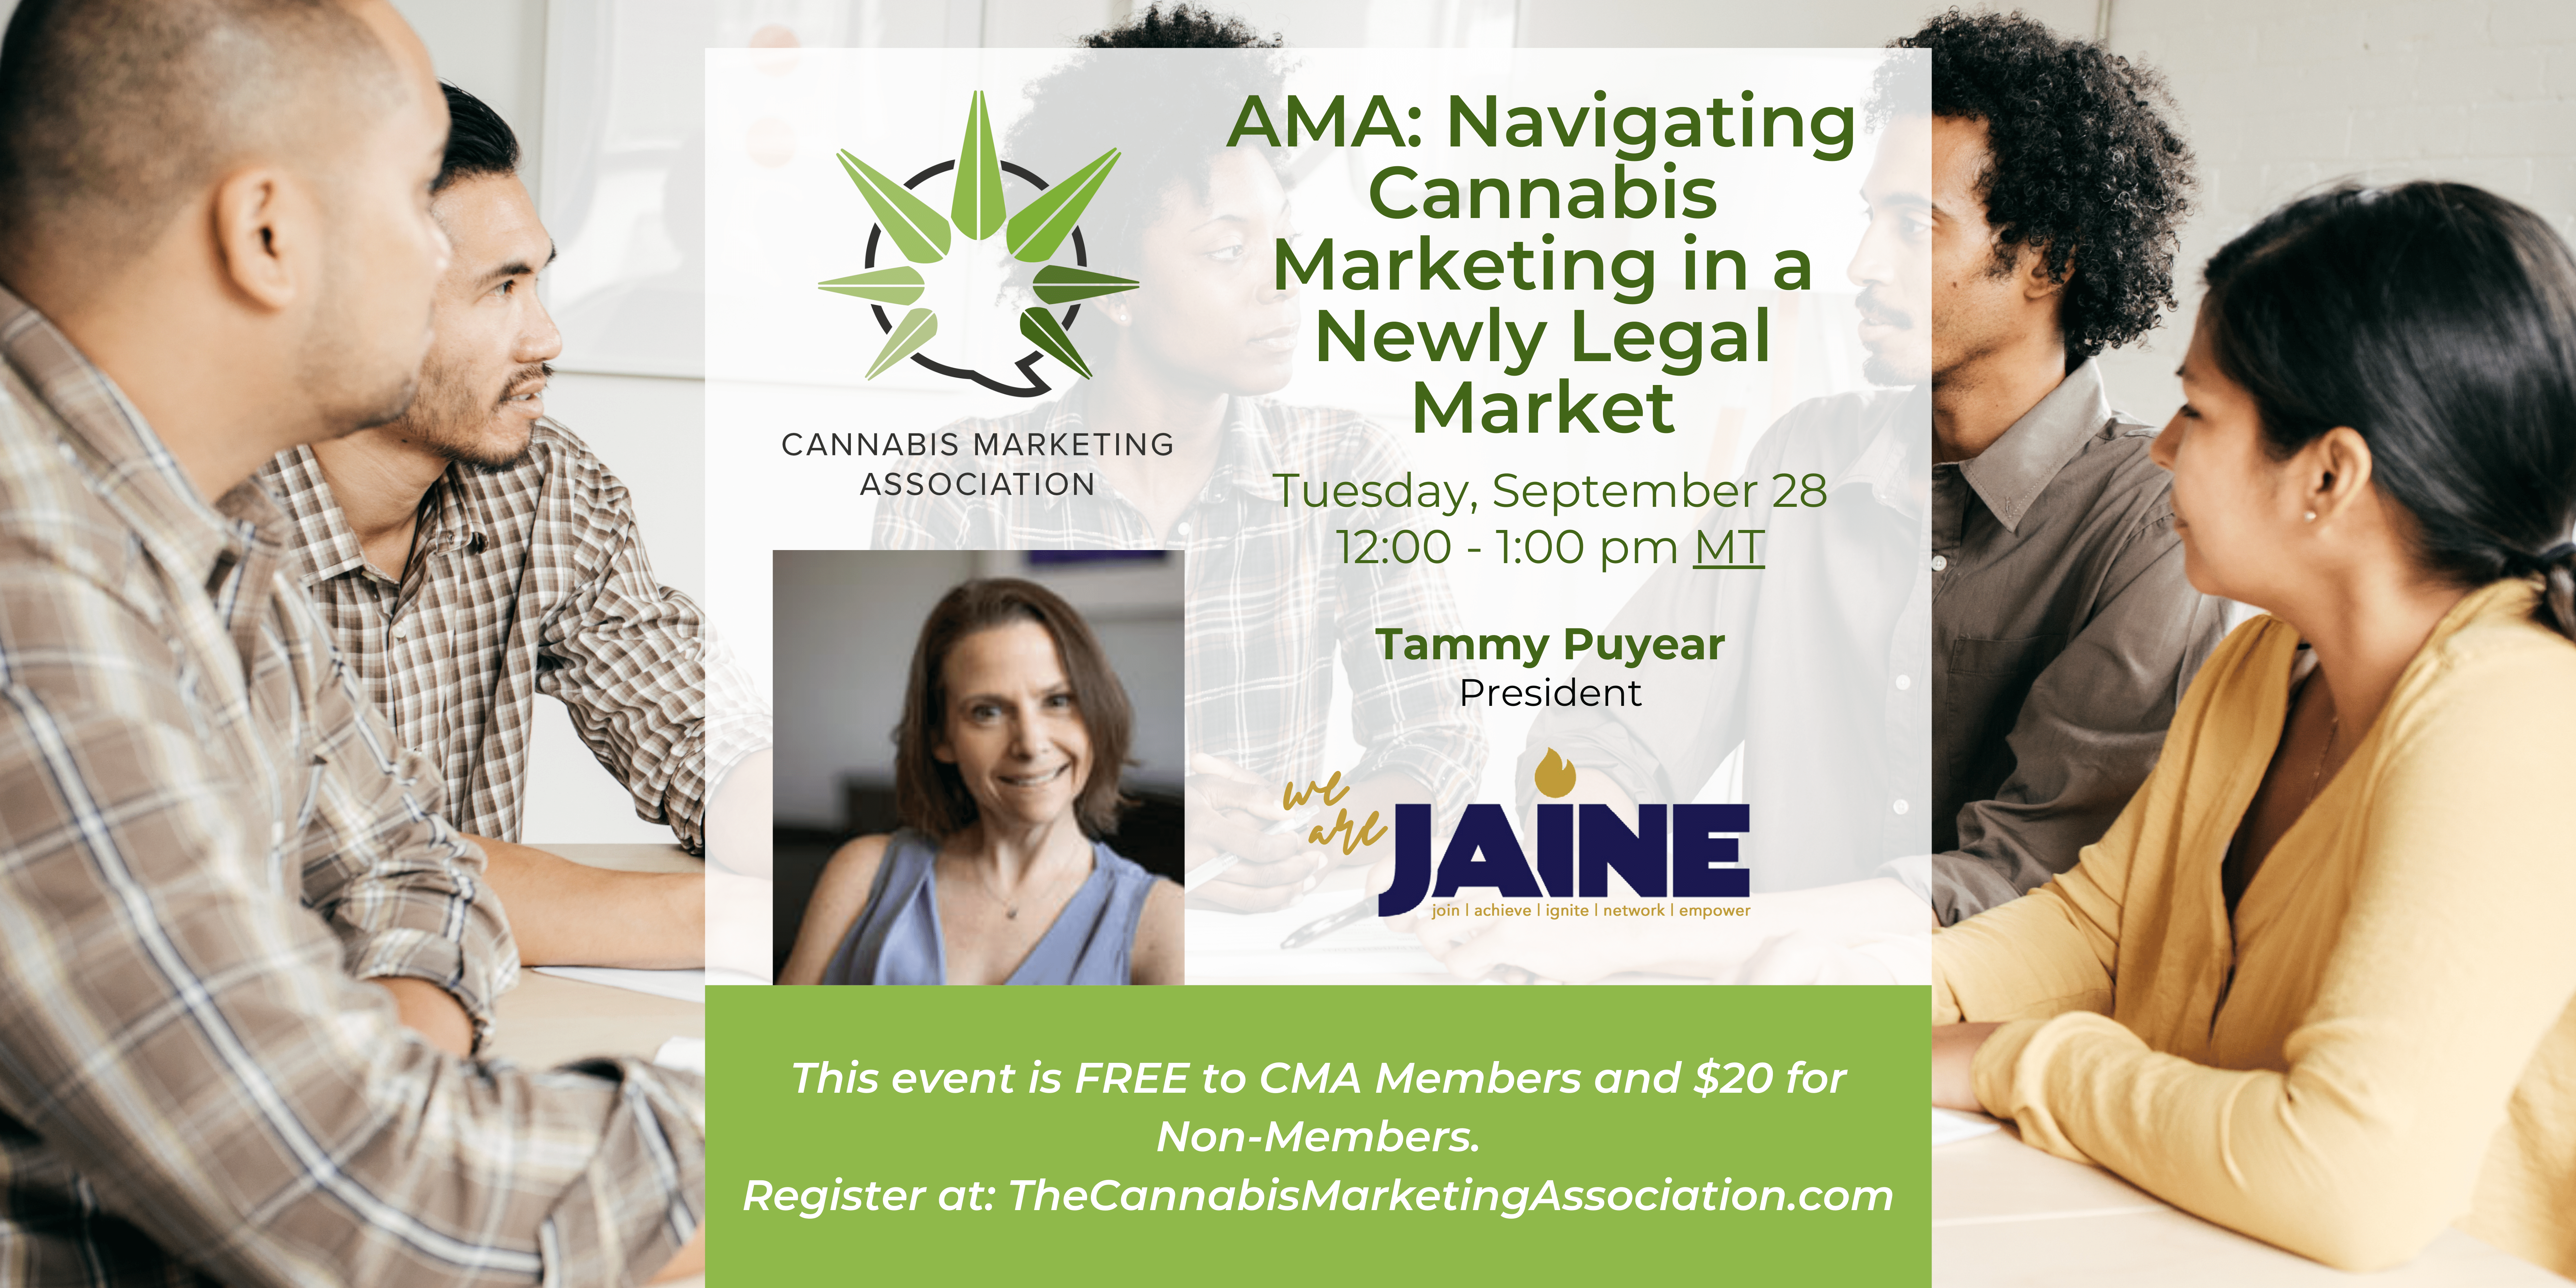 AMA: Navigating Cannabis Marketing in a Newly Legal Market